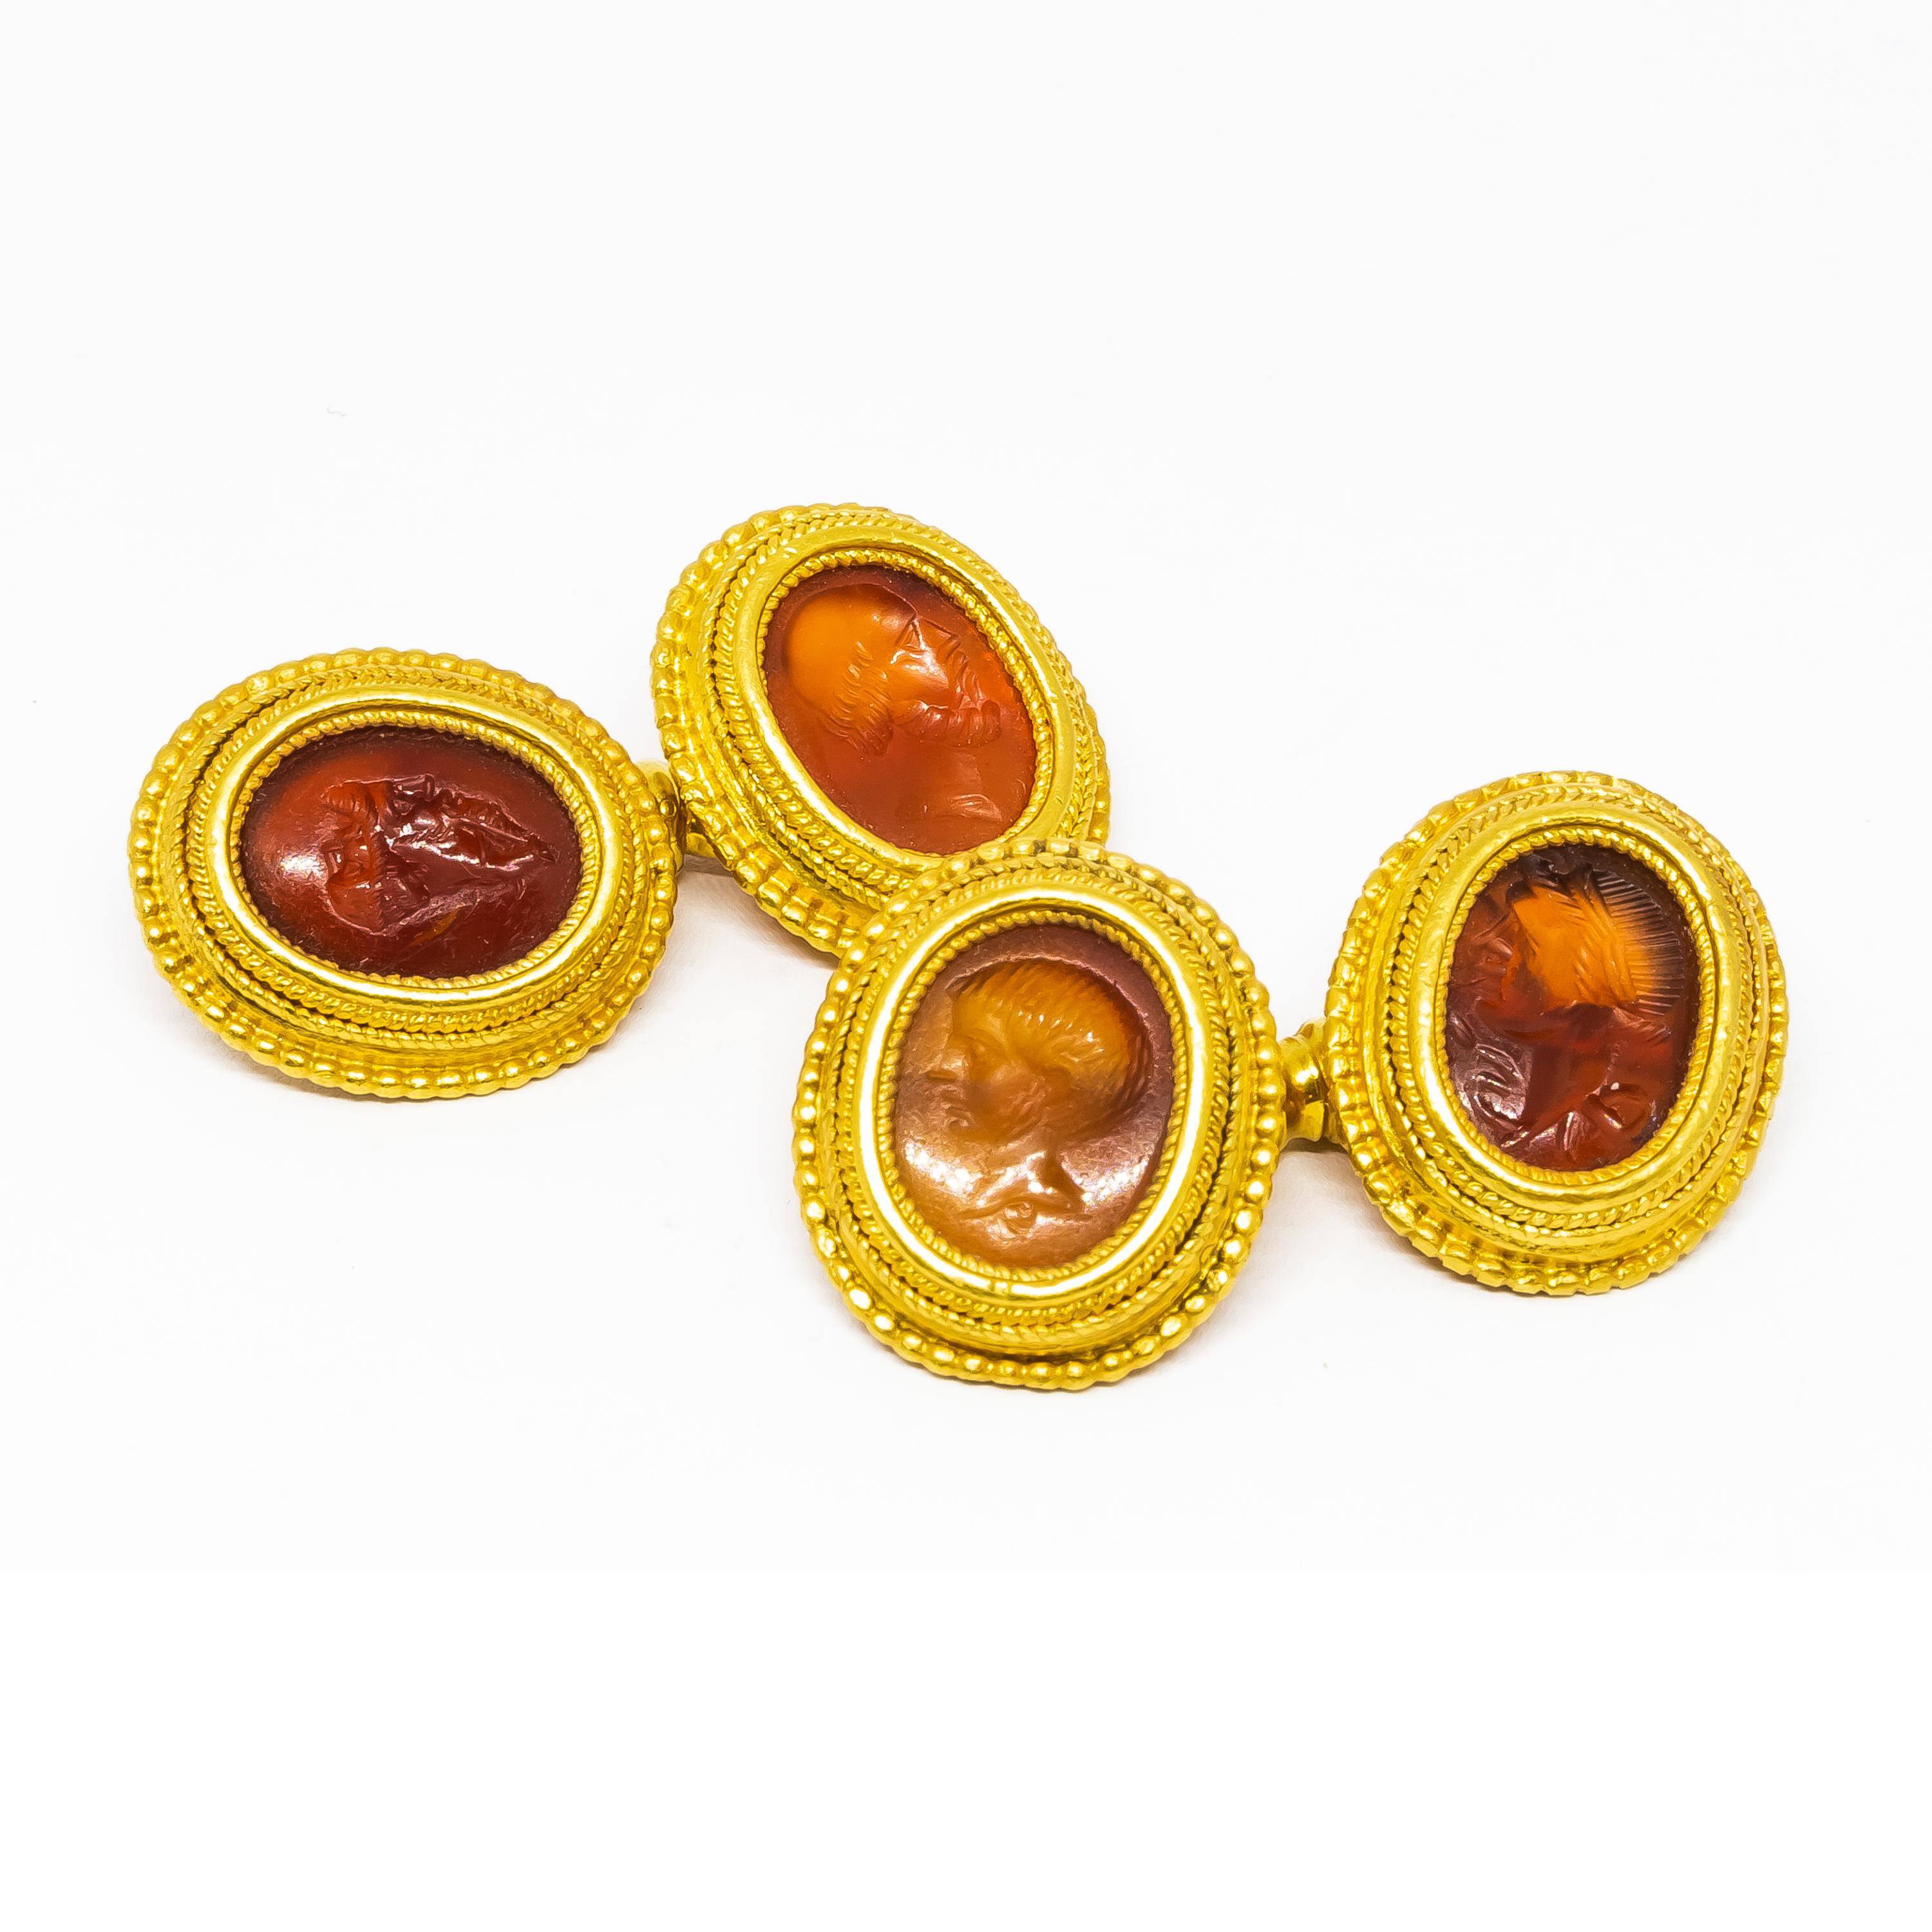 A pair of Wiese, intaglio cufflinks, set with cornelian intaglios, mounted in 18ct gold. The intaglios depict a child's head; the bust of a philosopher; Hygeia, the Greek goddess of hygiene, with a serpent around her neck, this intaglio is dated to